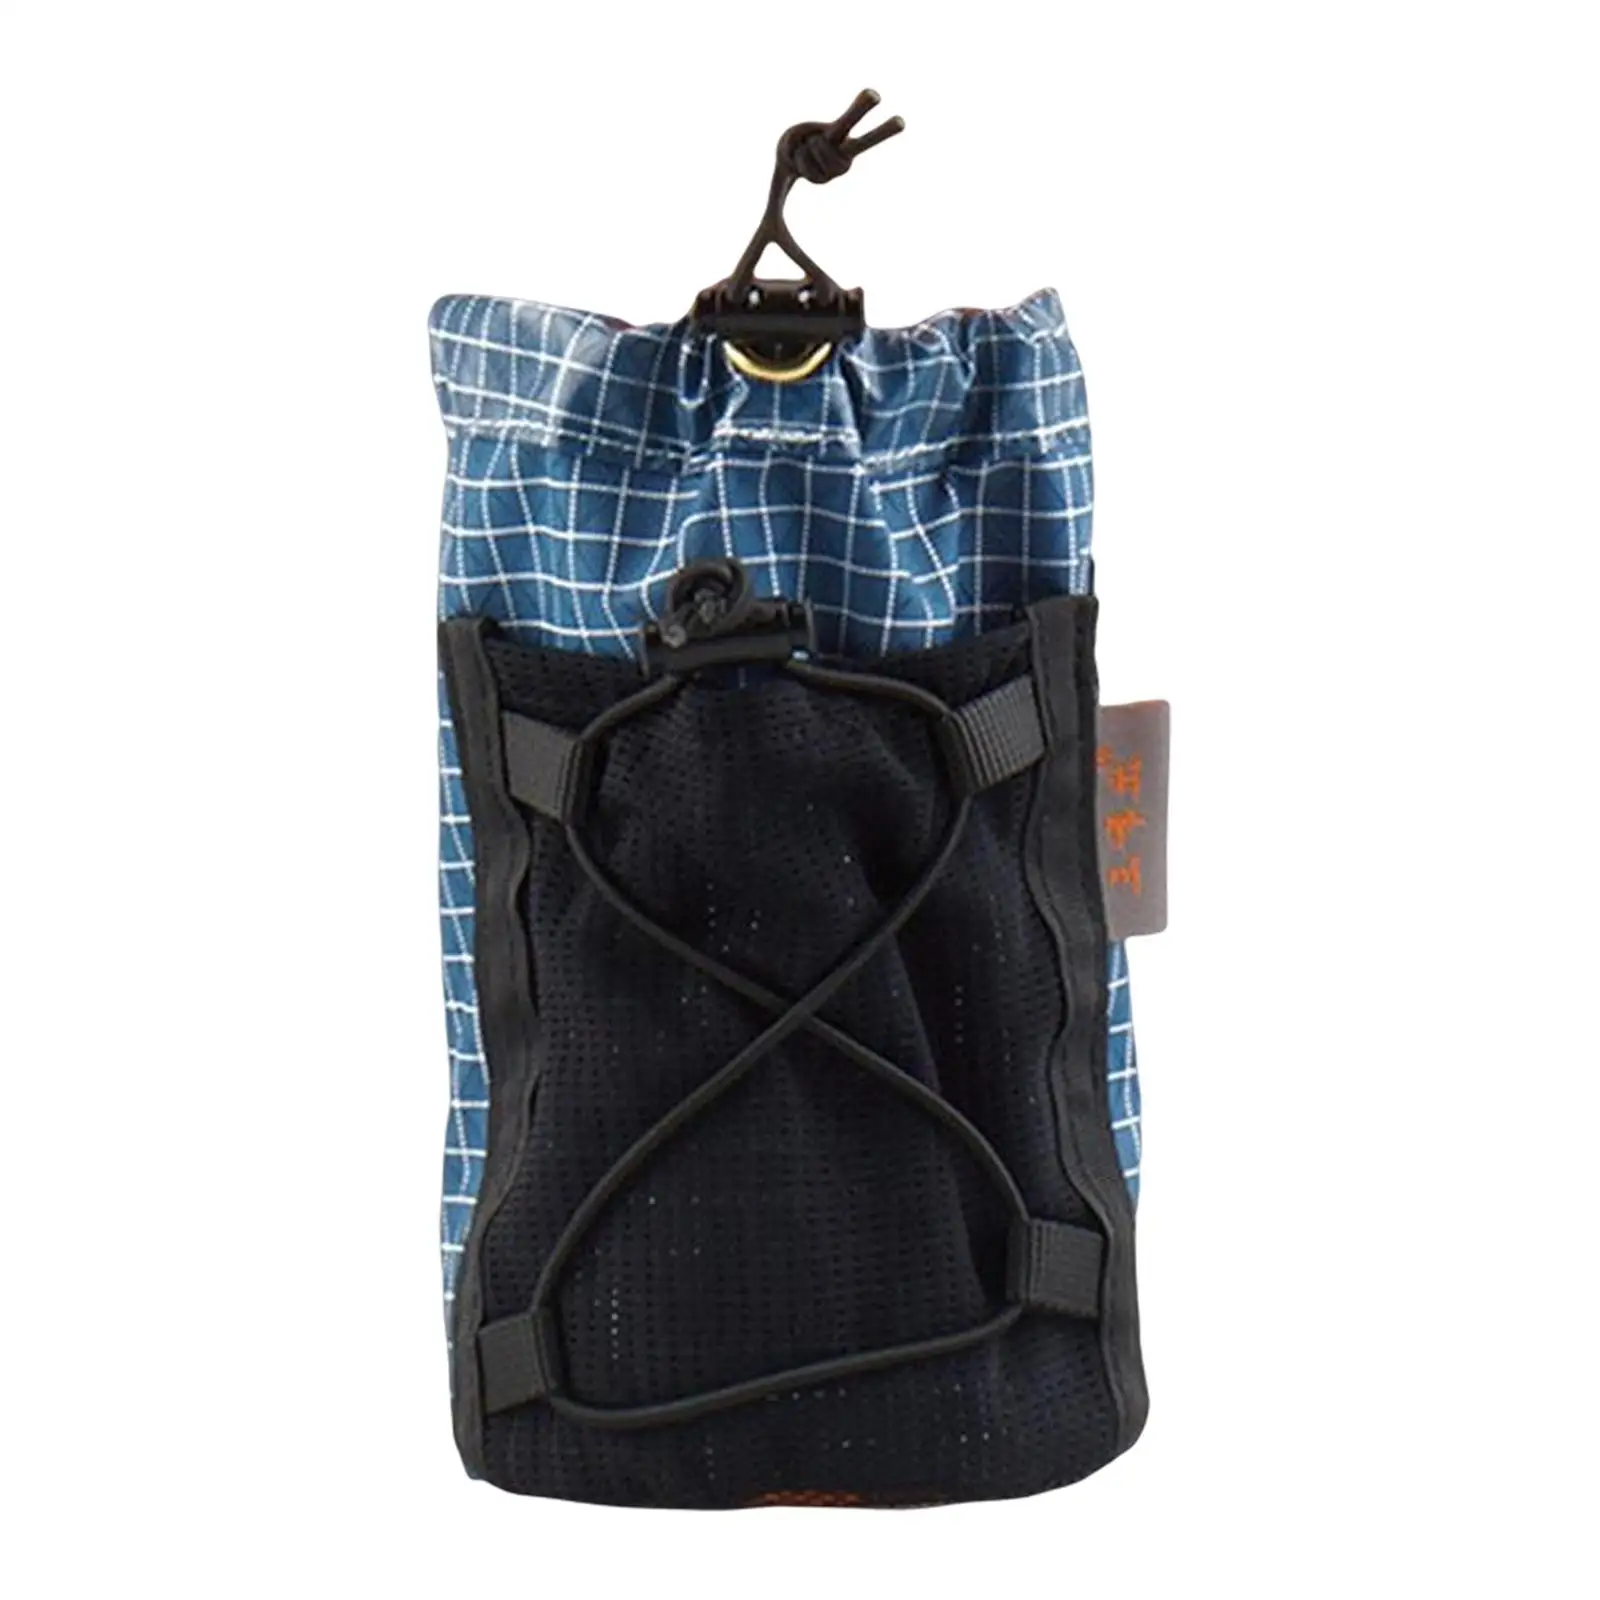 Carrier Hiking Cycling Traveling Water Bottle Holder Pouch Bag